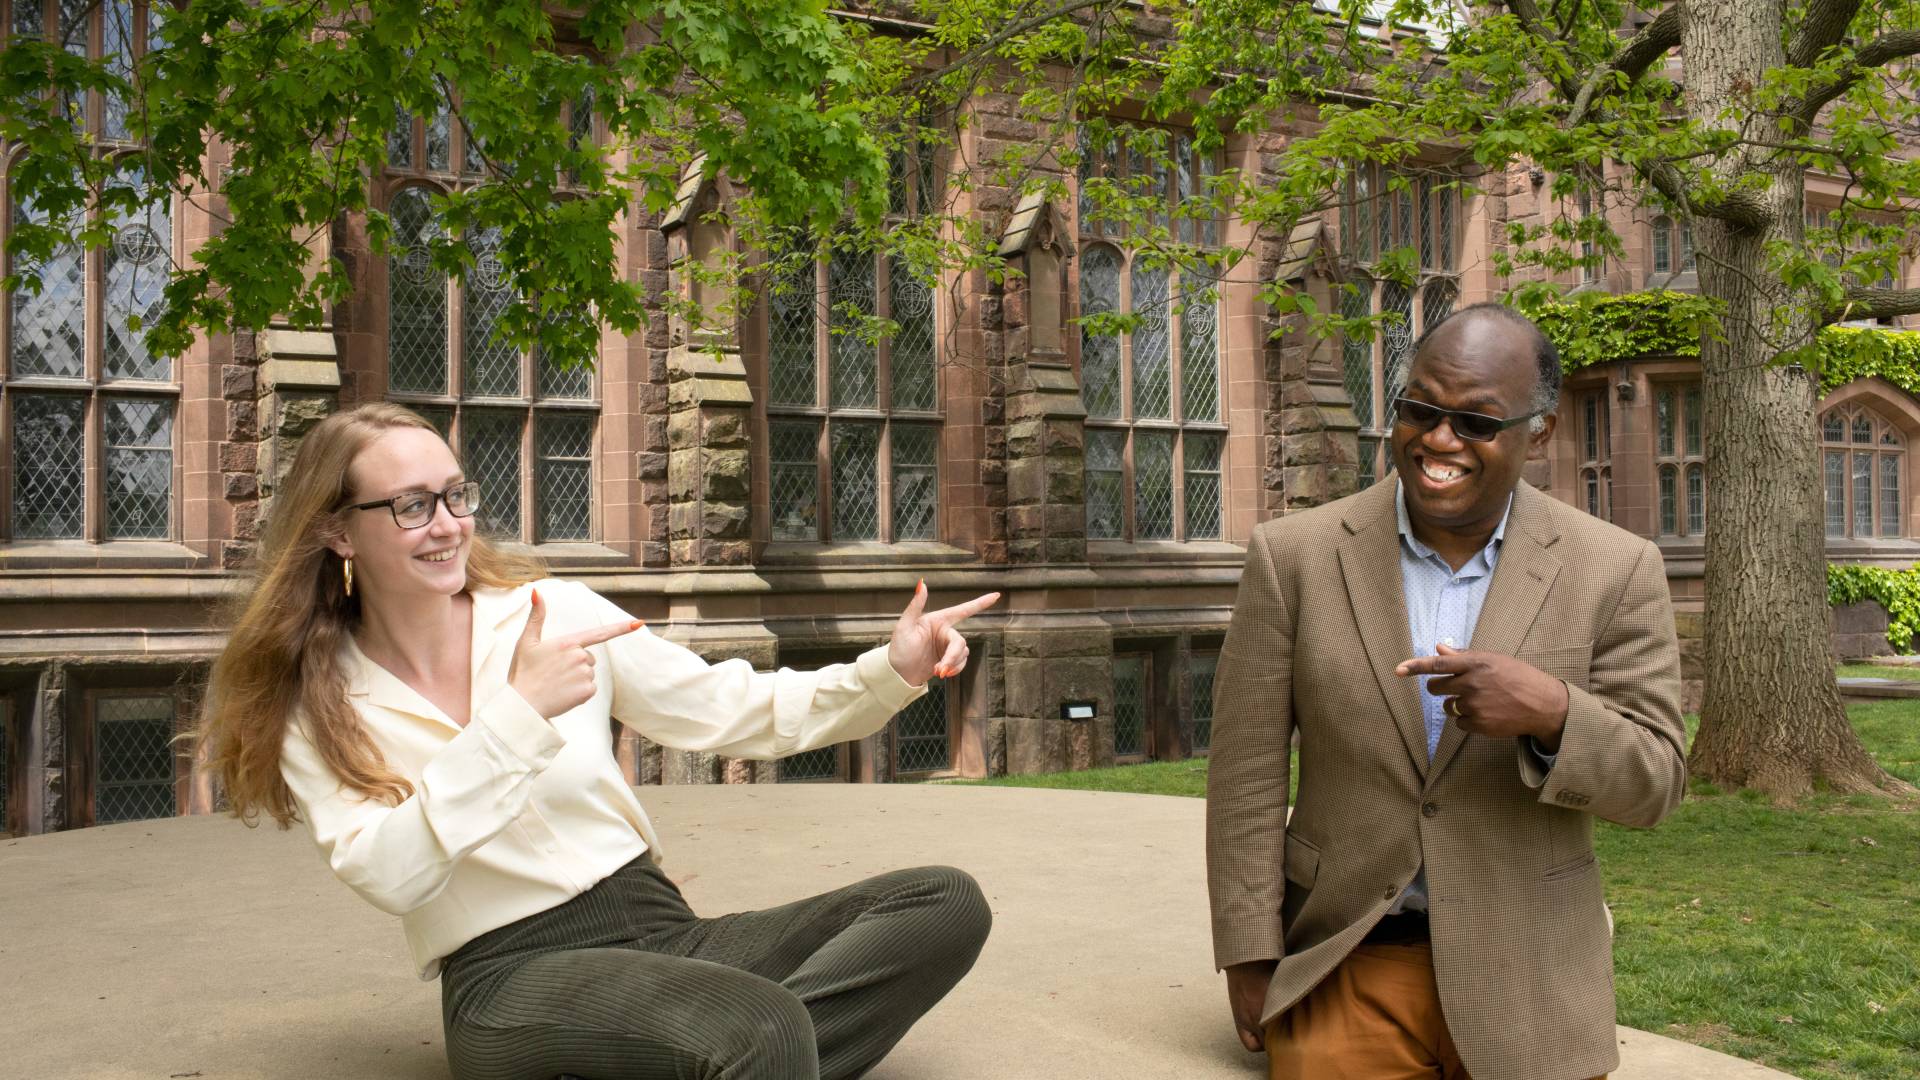 Treadway and her senior thesis adviser, Dan-el Padilla Peralta, an associate professor of classics and a 2006 Princeton graduate, share a light moment on campus.